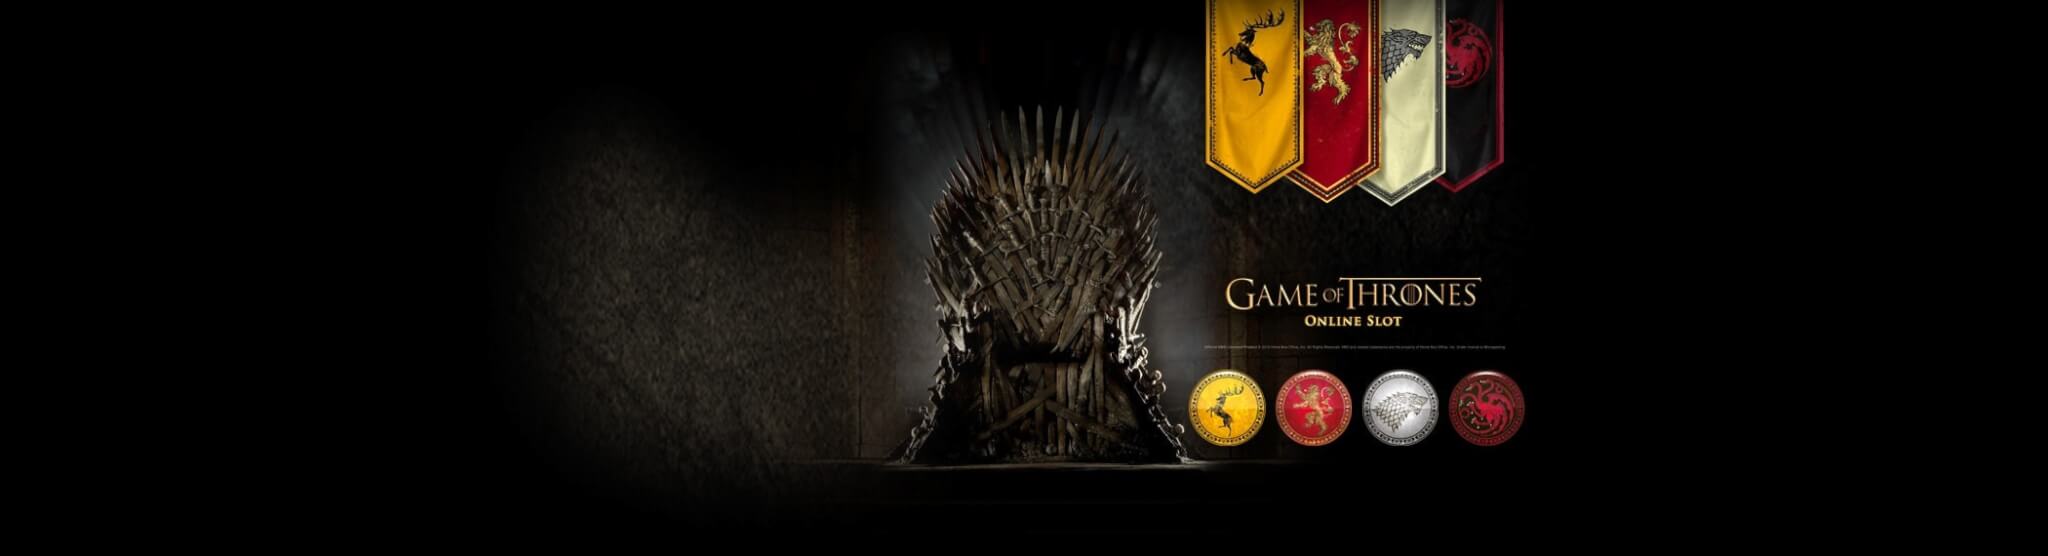 Game-of-Thrones-Online-Slot-Microgaming